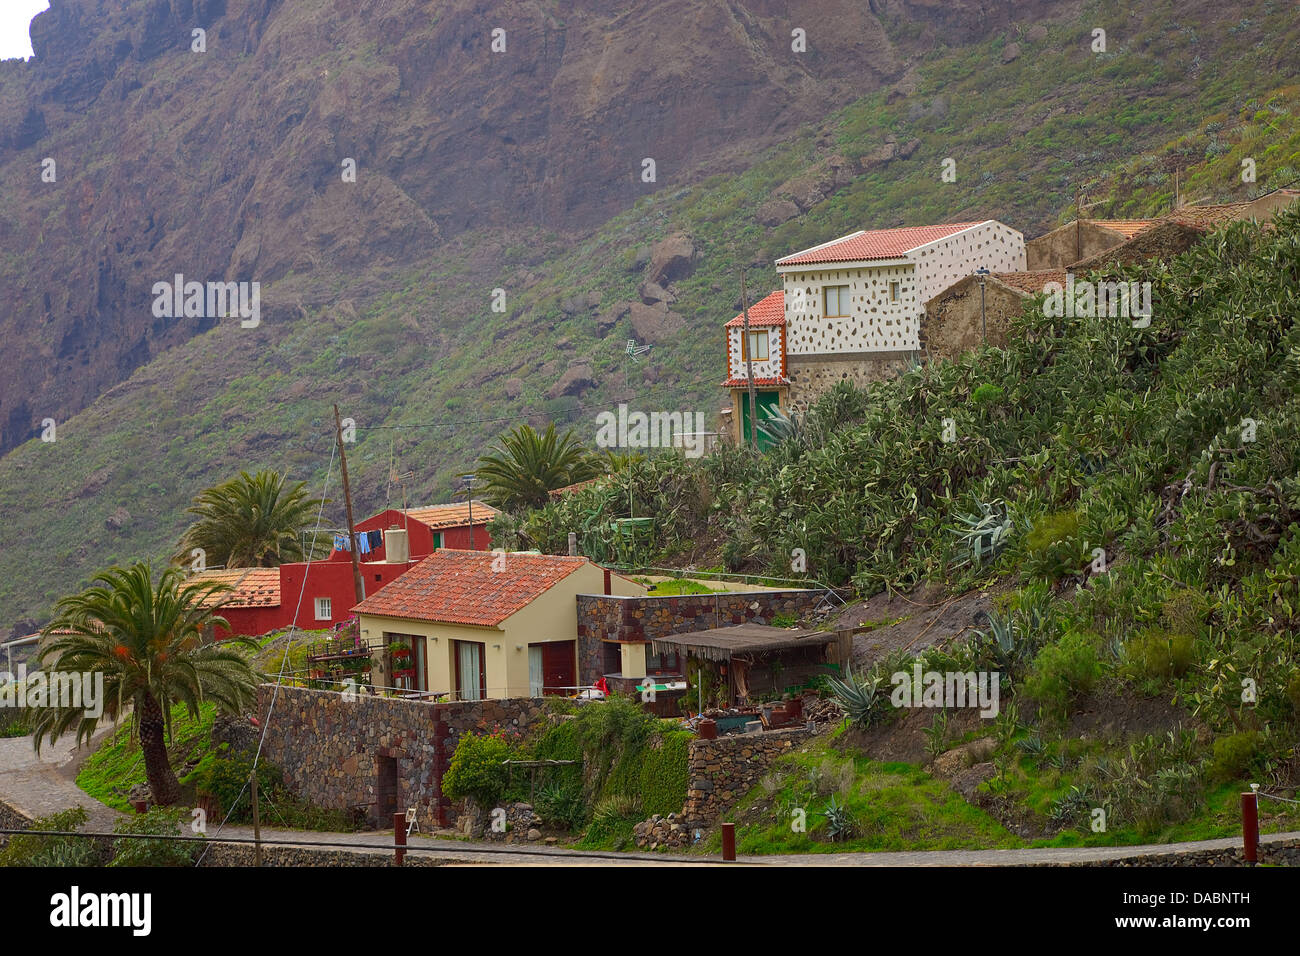 Village of Masca in the mountains of Tenerife island Stock Photo